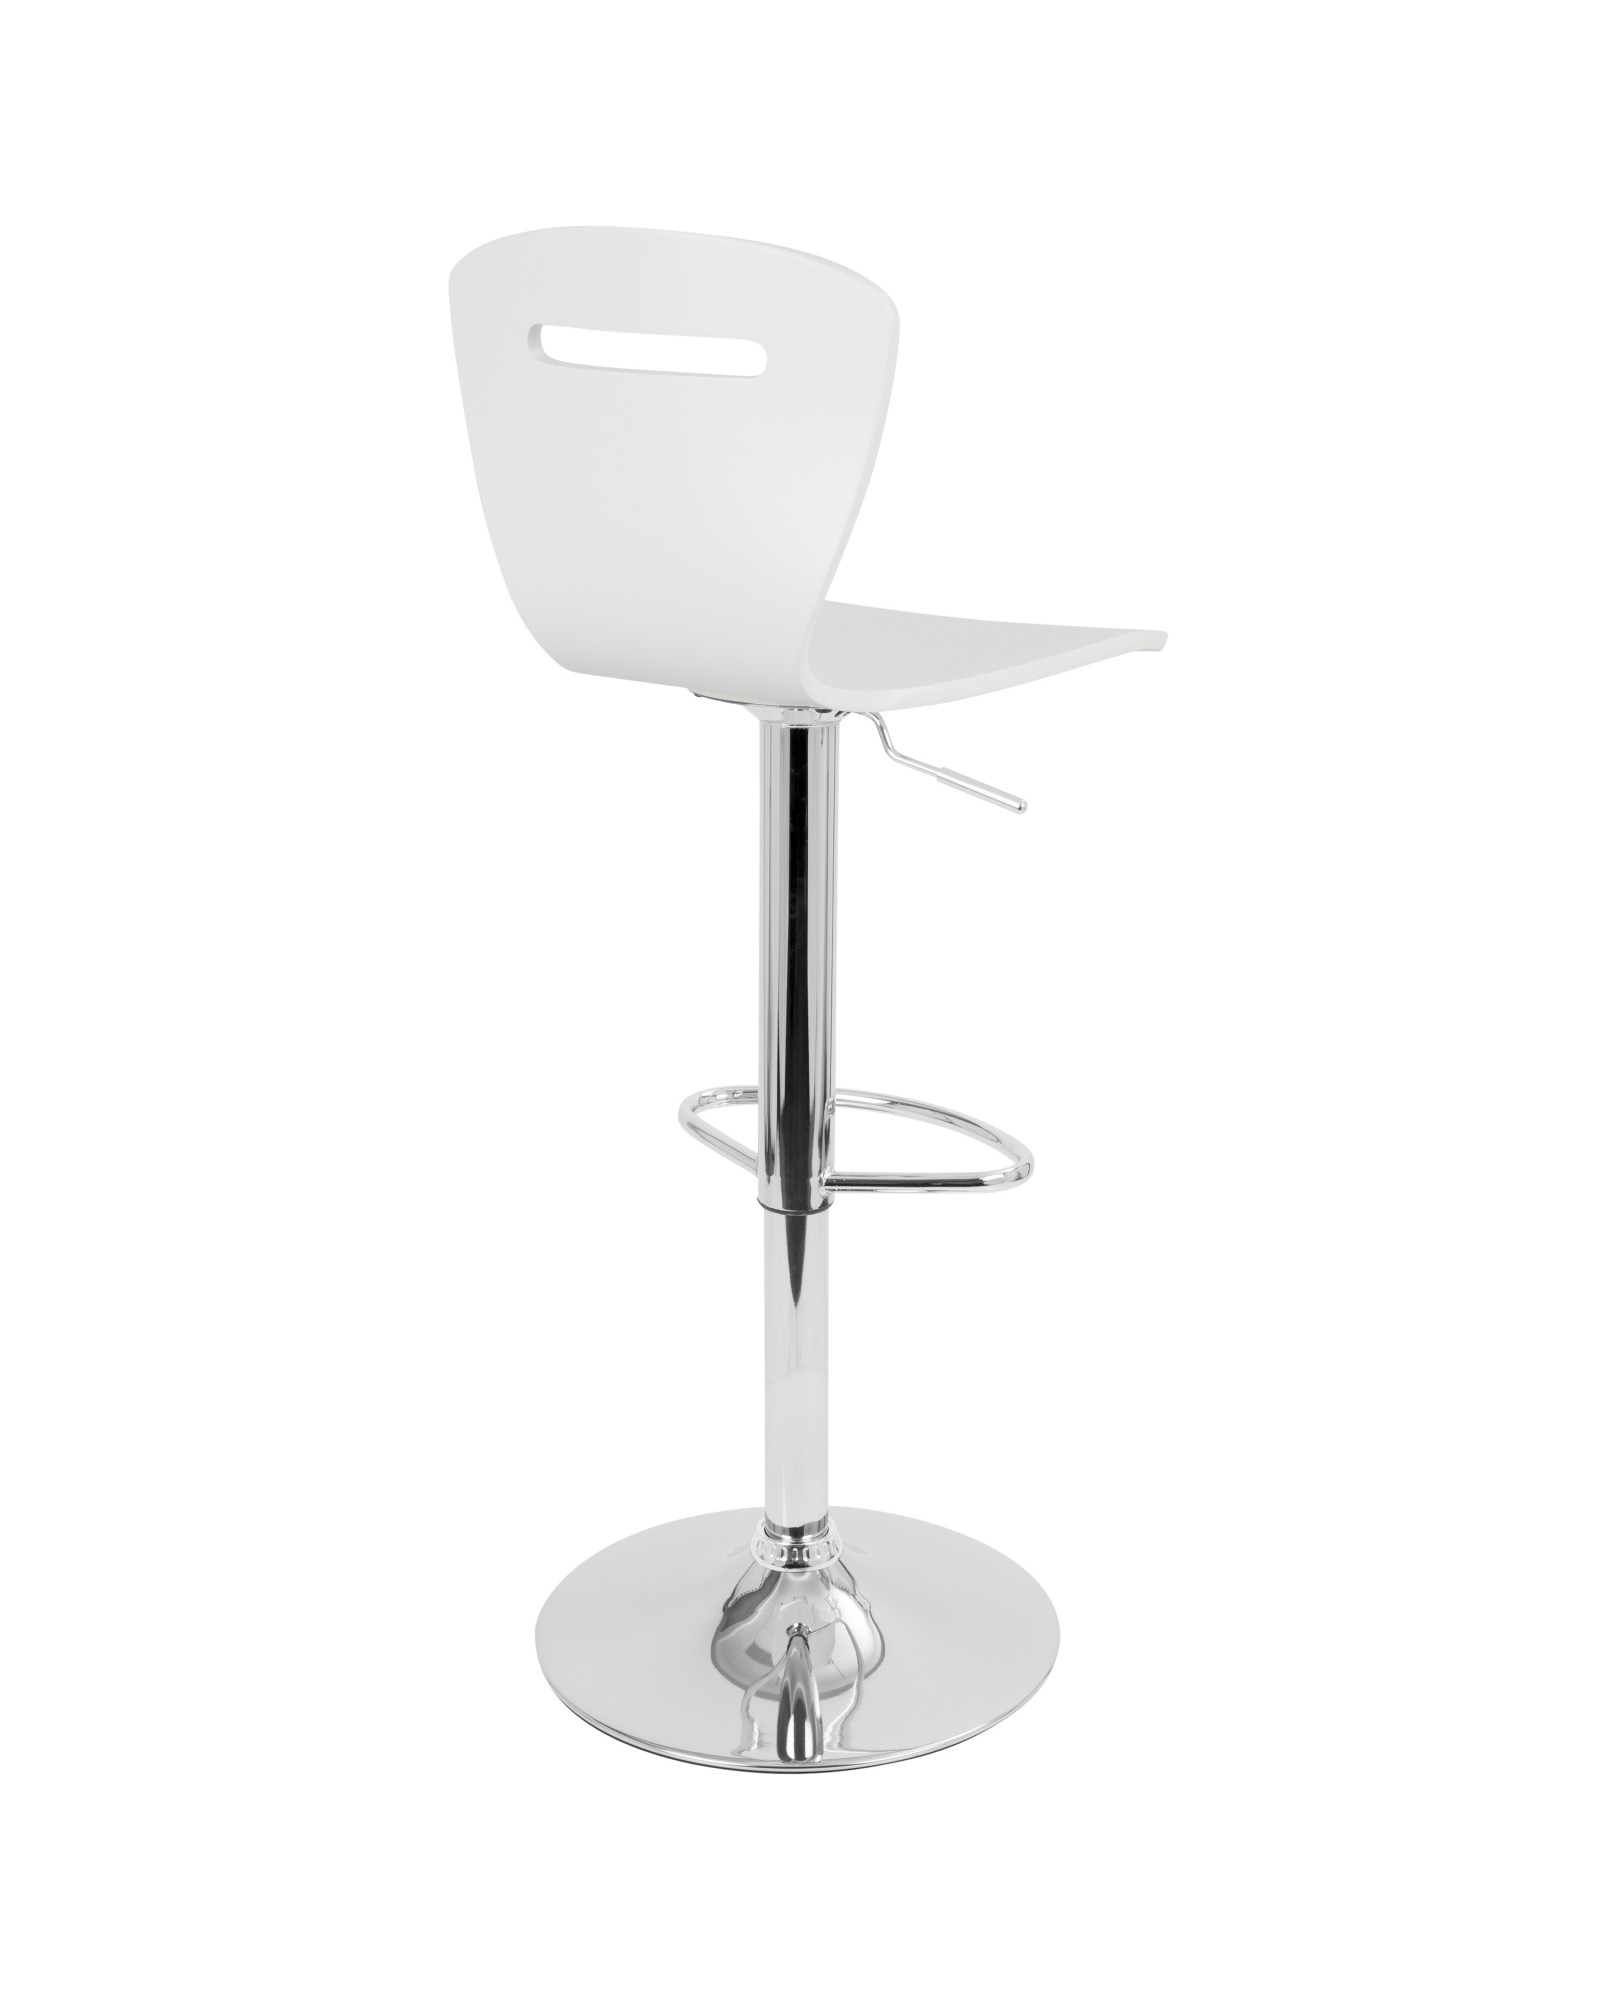 H2 Contemporary Adjustable Barstool in White Wood